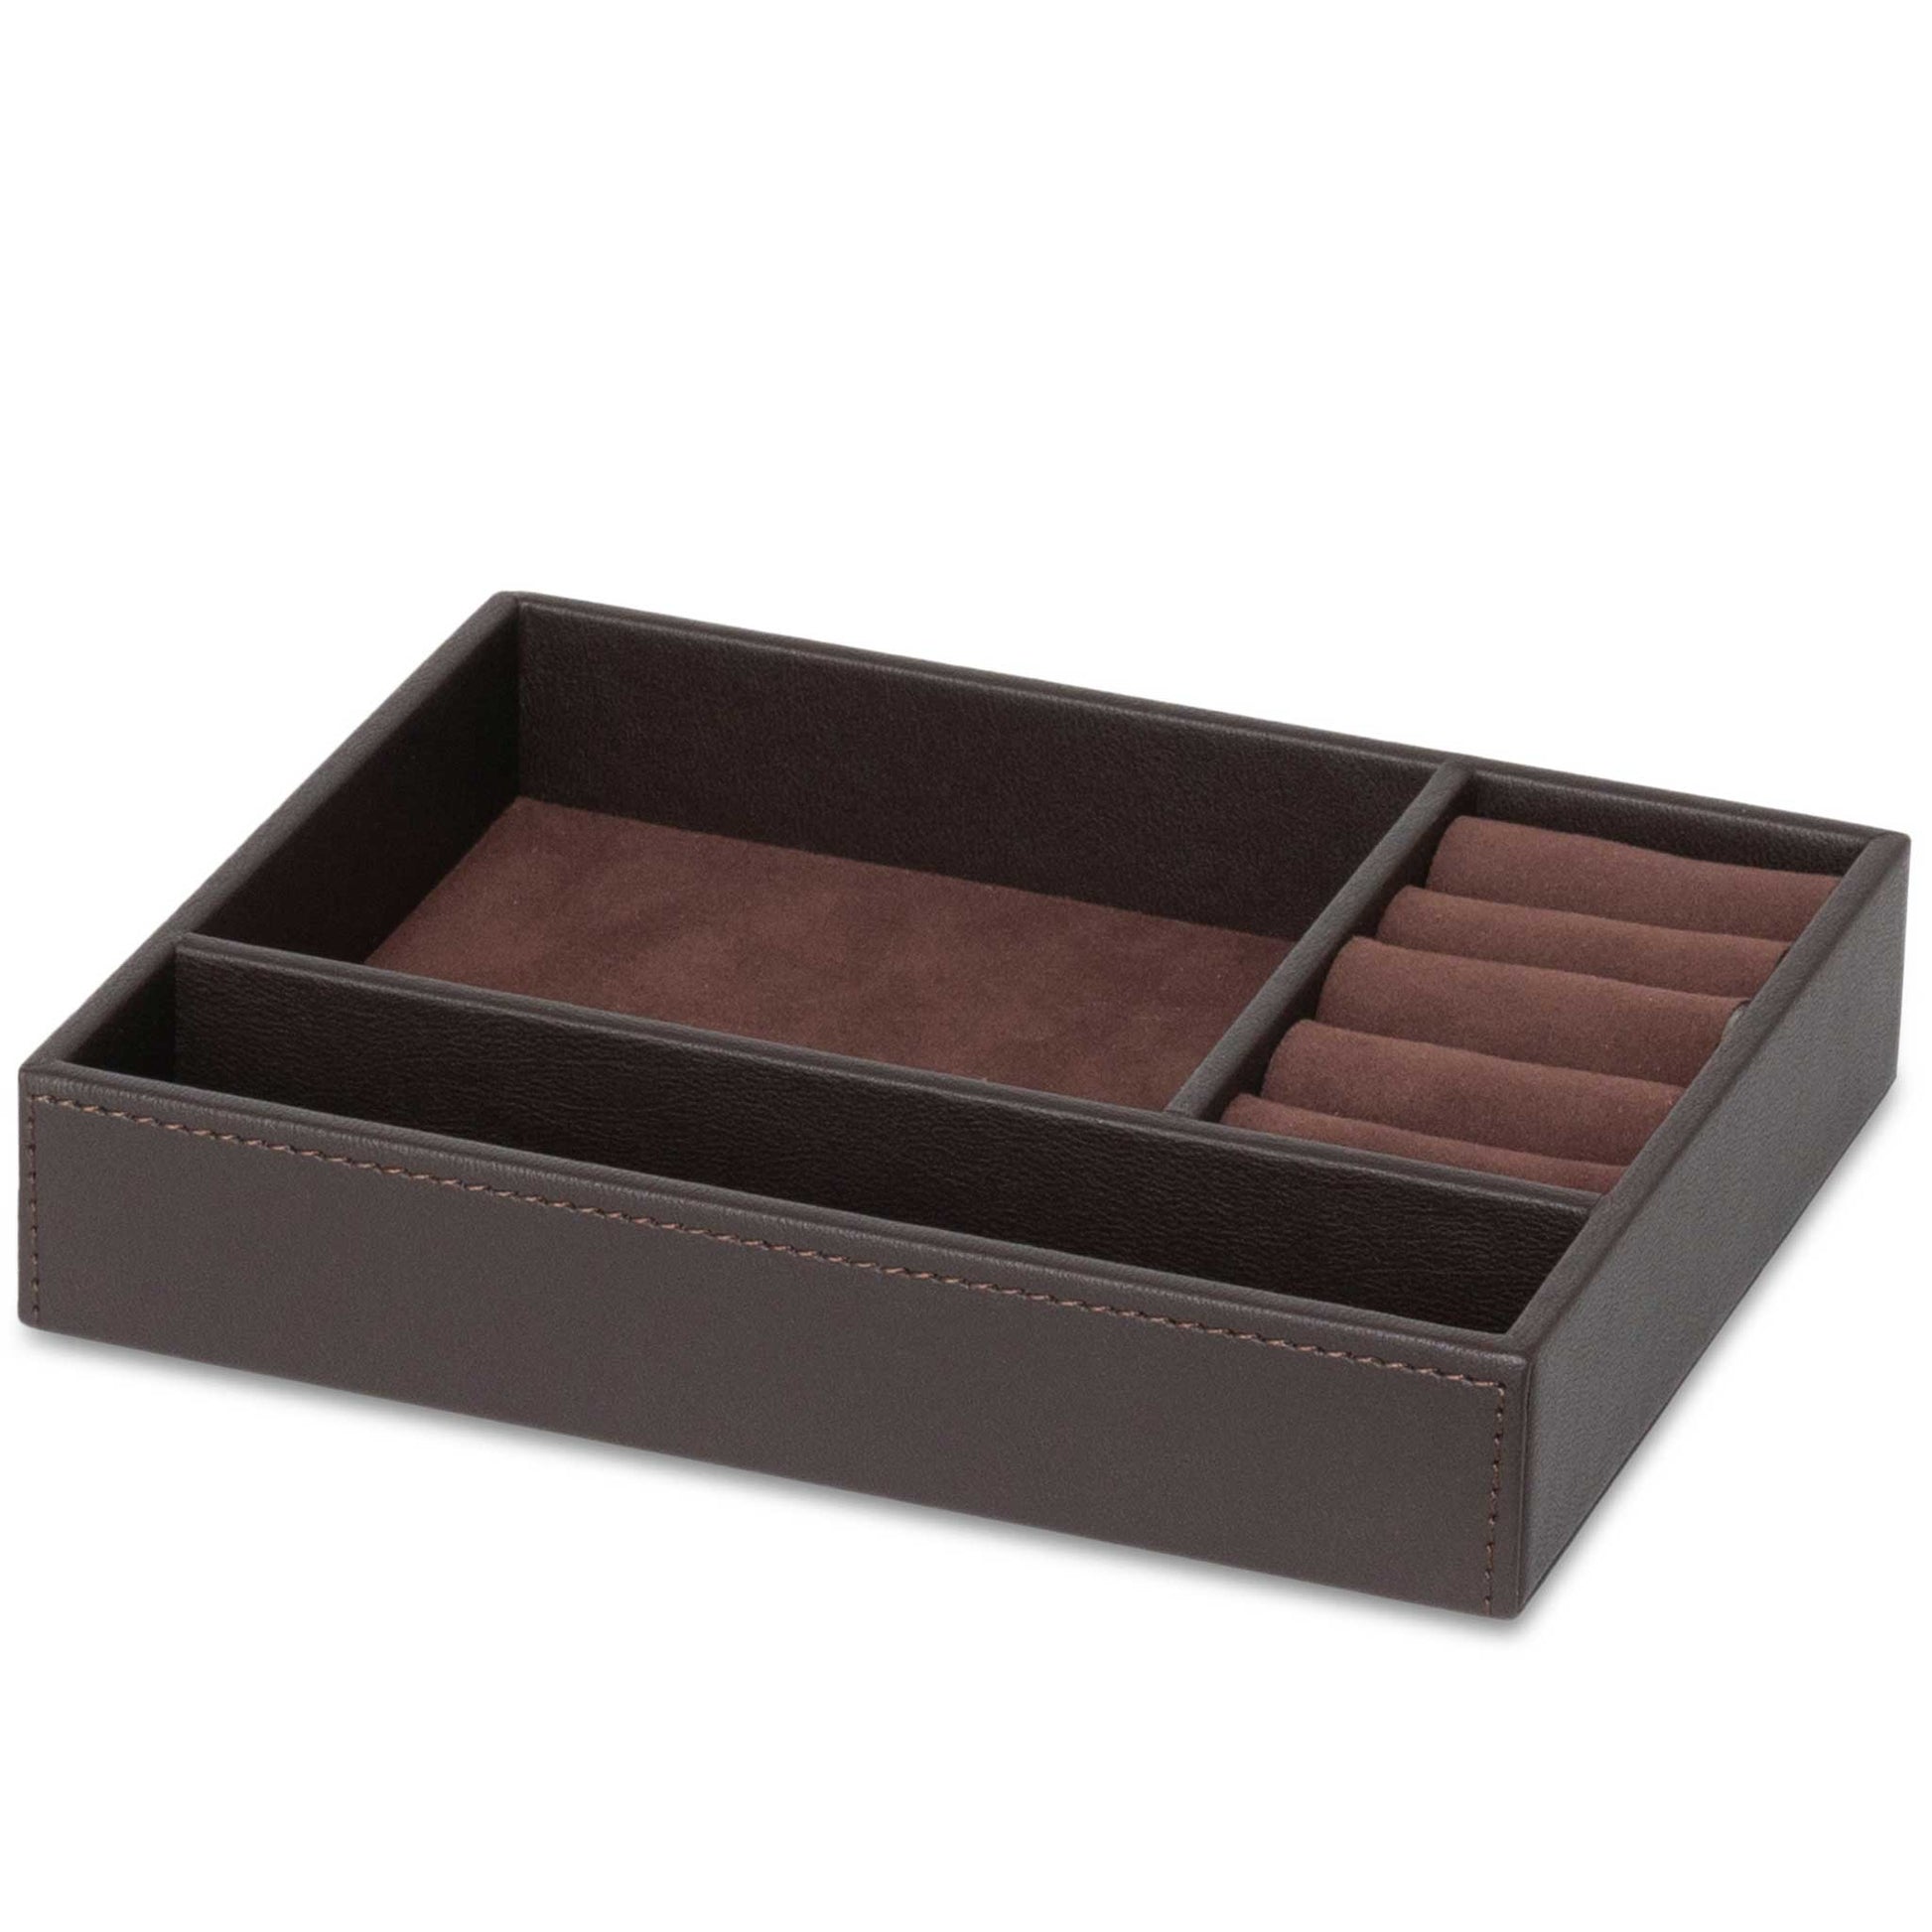 Bentley Andros brown jewellery tray with jewellery cushions viewed from an angle